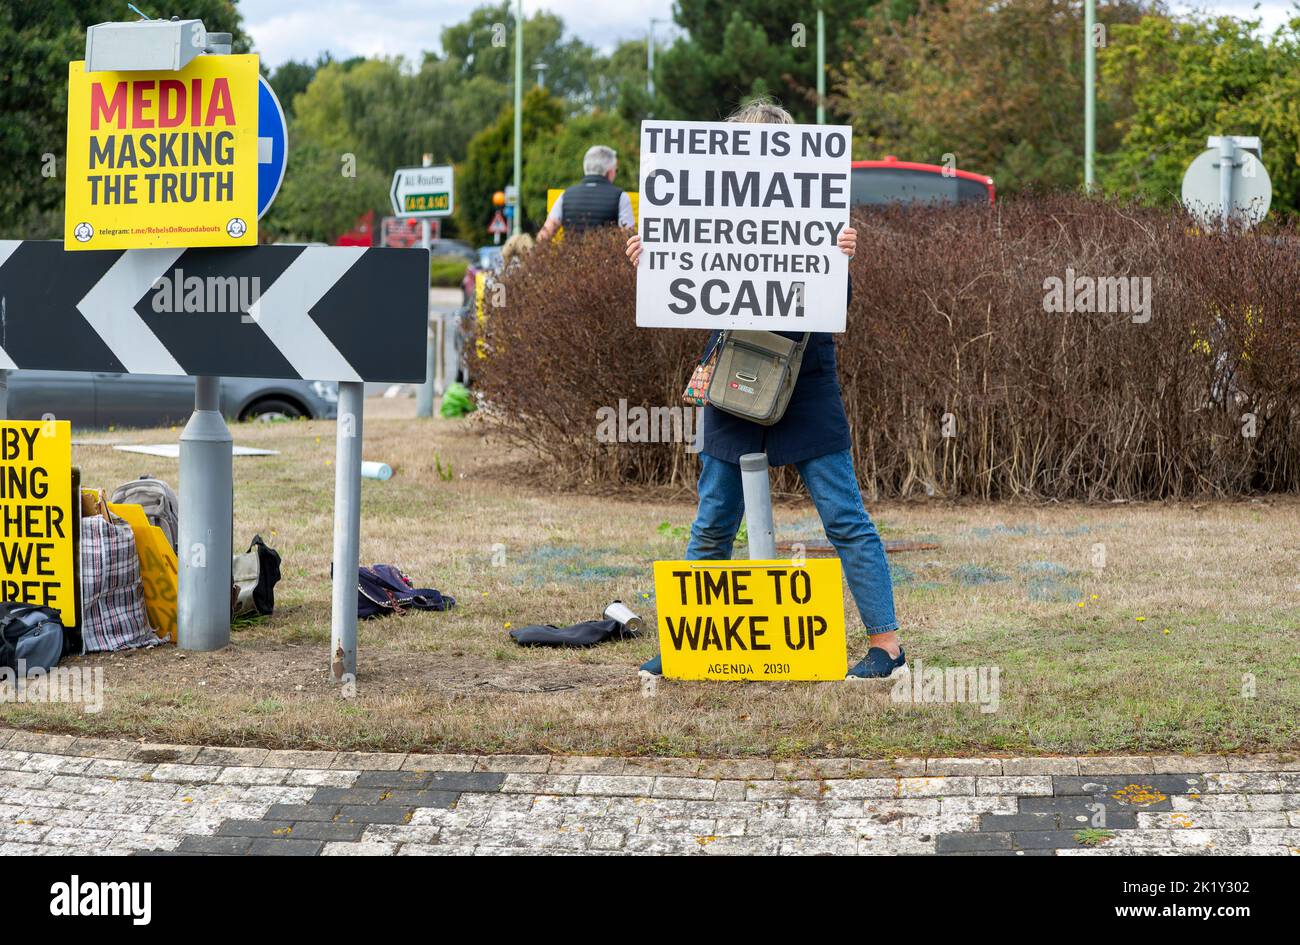 Protest at busy roundabaout, Martlesham, Suffolk, England, UK Climate Emergency is a scam Stock Photo